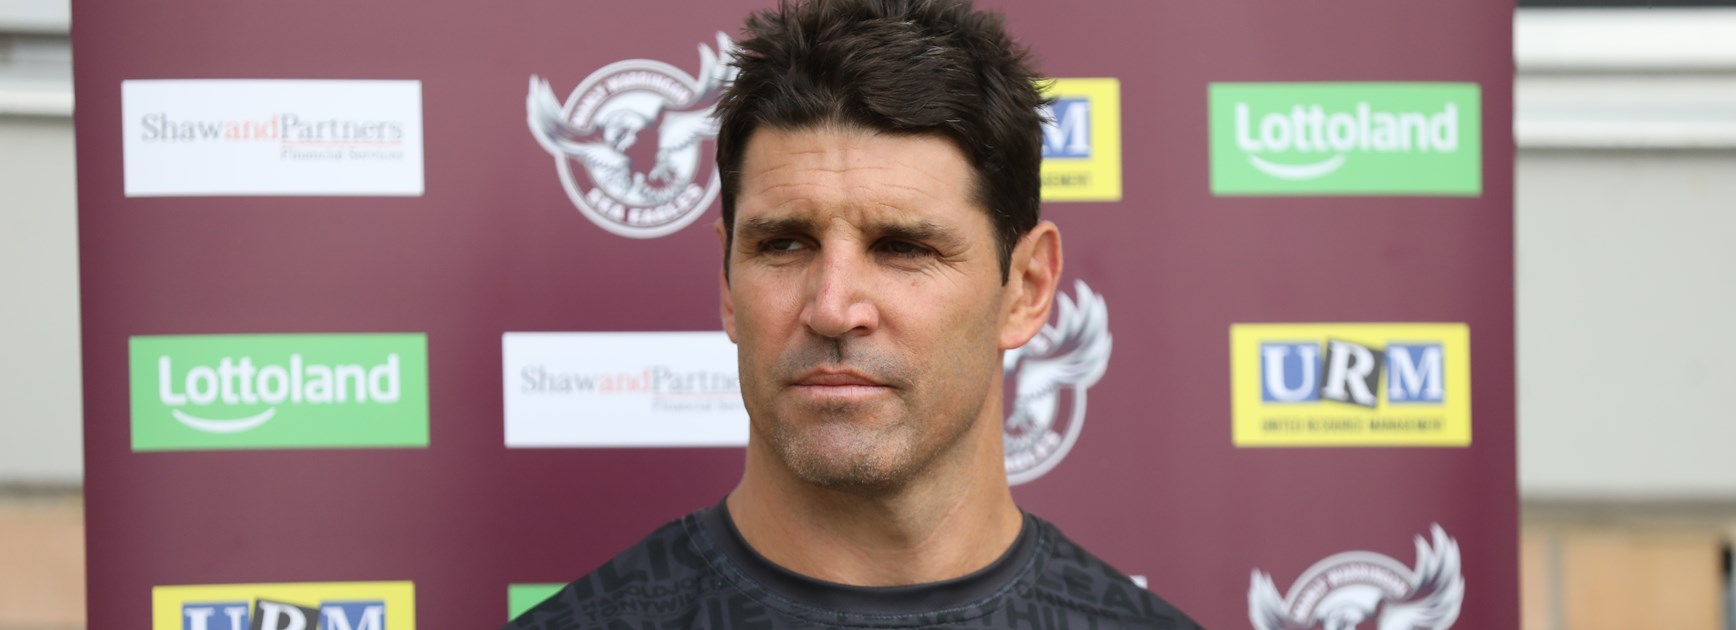 NRL Preview: Barrett wary of Tigers attack